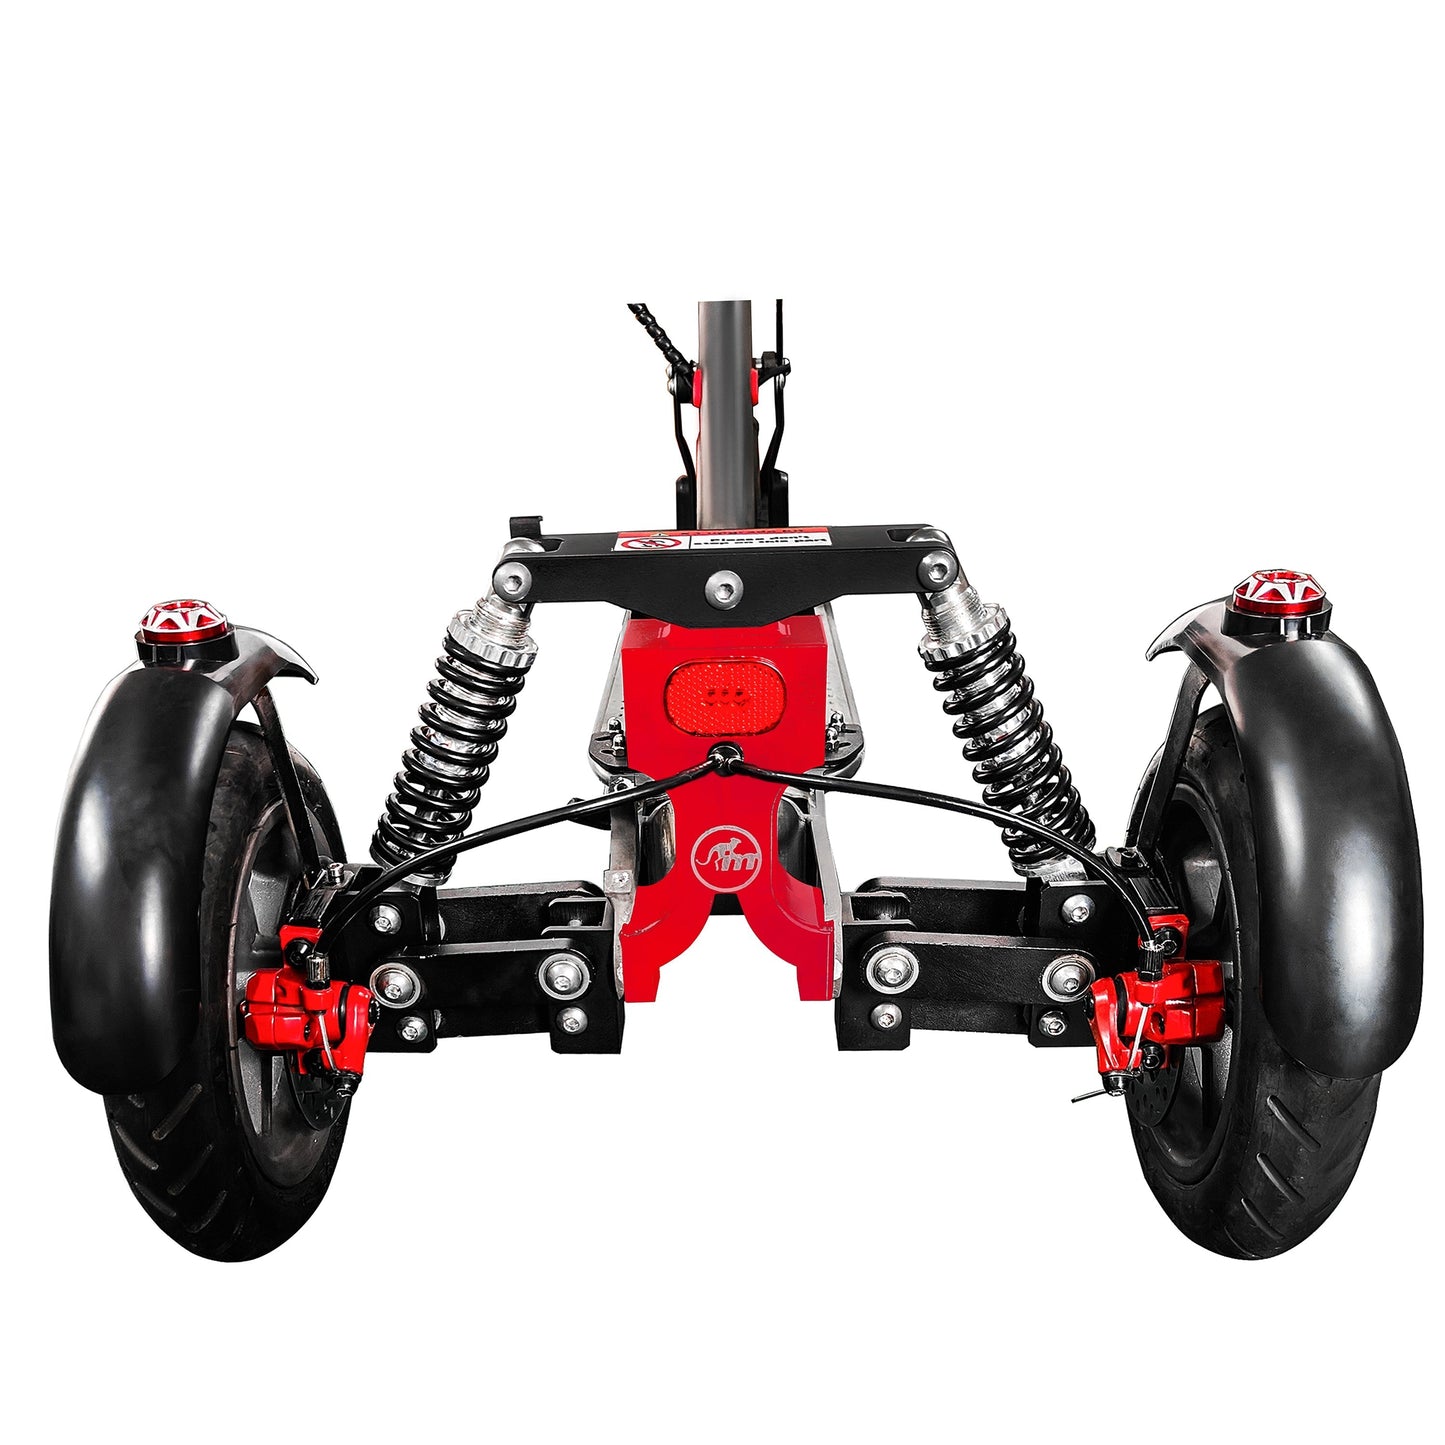 Monorim X3 upgrade kit to be Three wheels special for xiaomi 1s frames